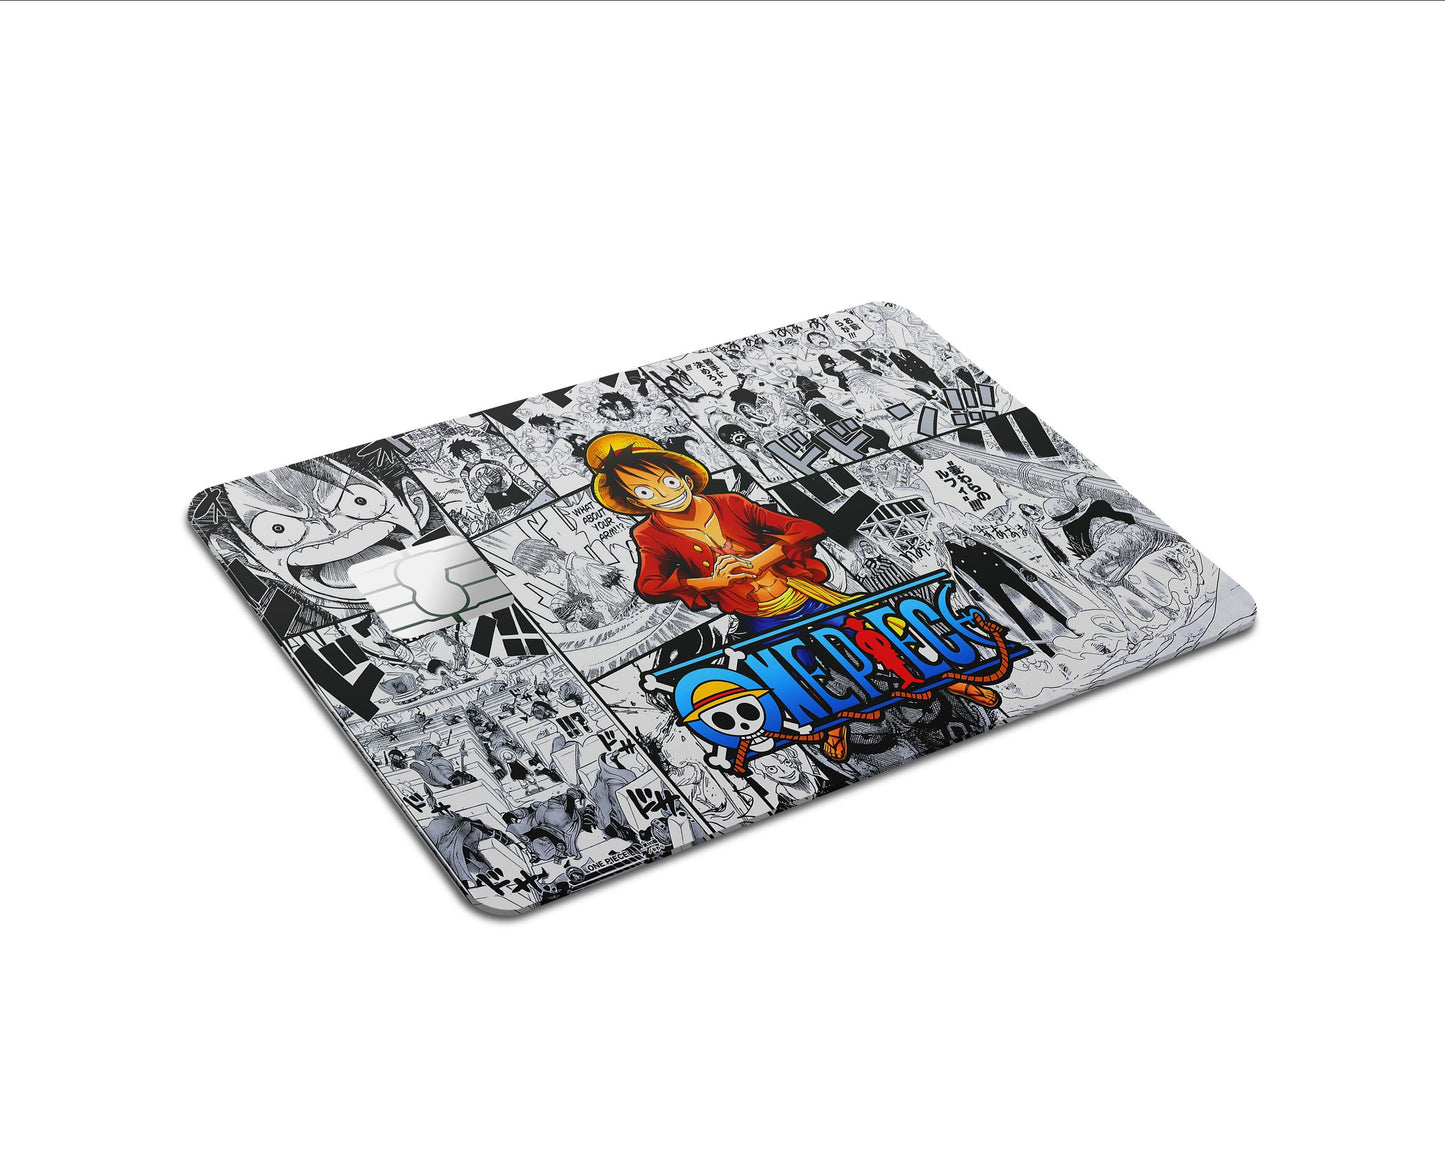 Anime Town Creations Credit Card One Piece Luffy Manga Full Skins - Anime One Piece Skin